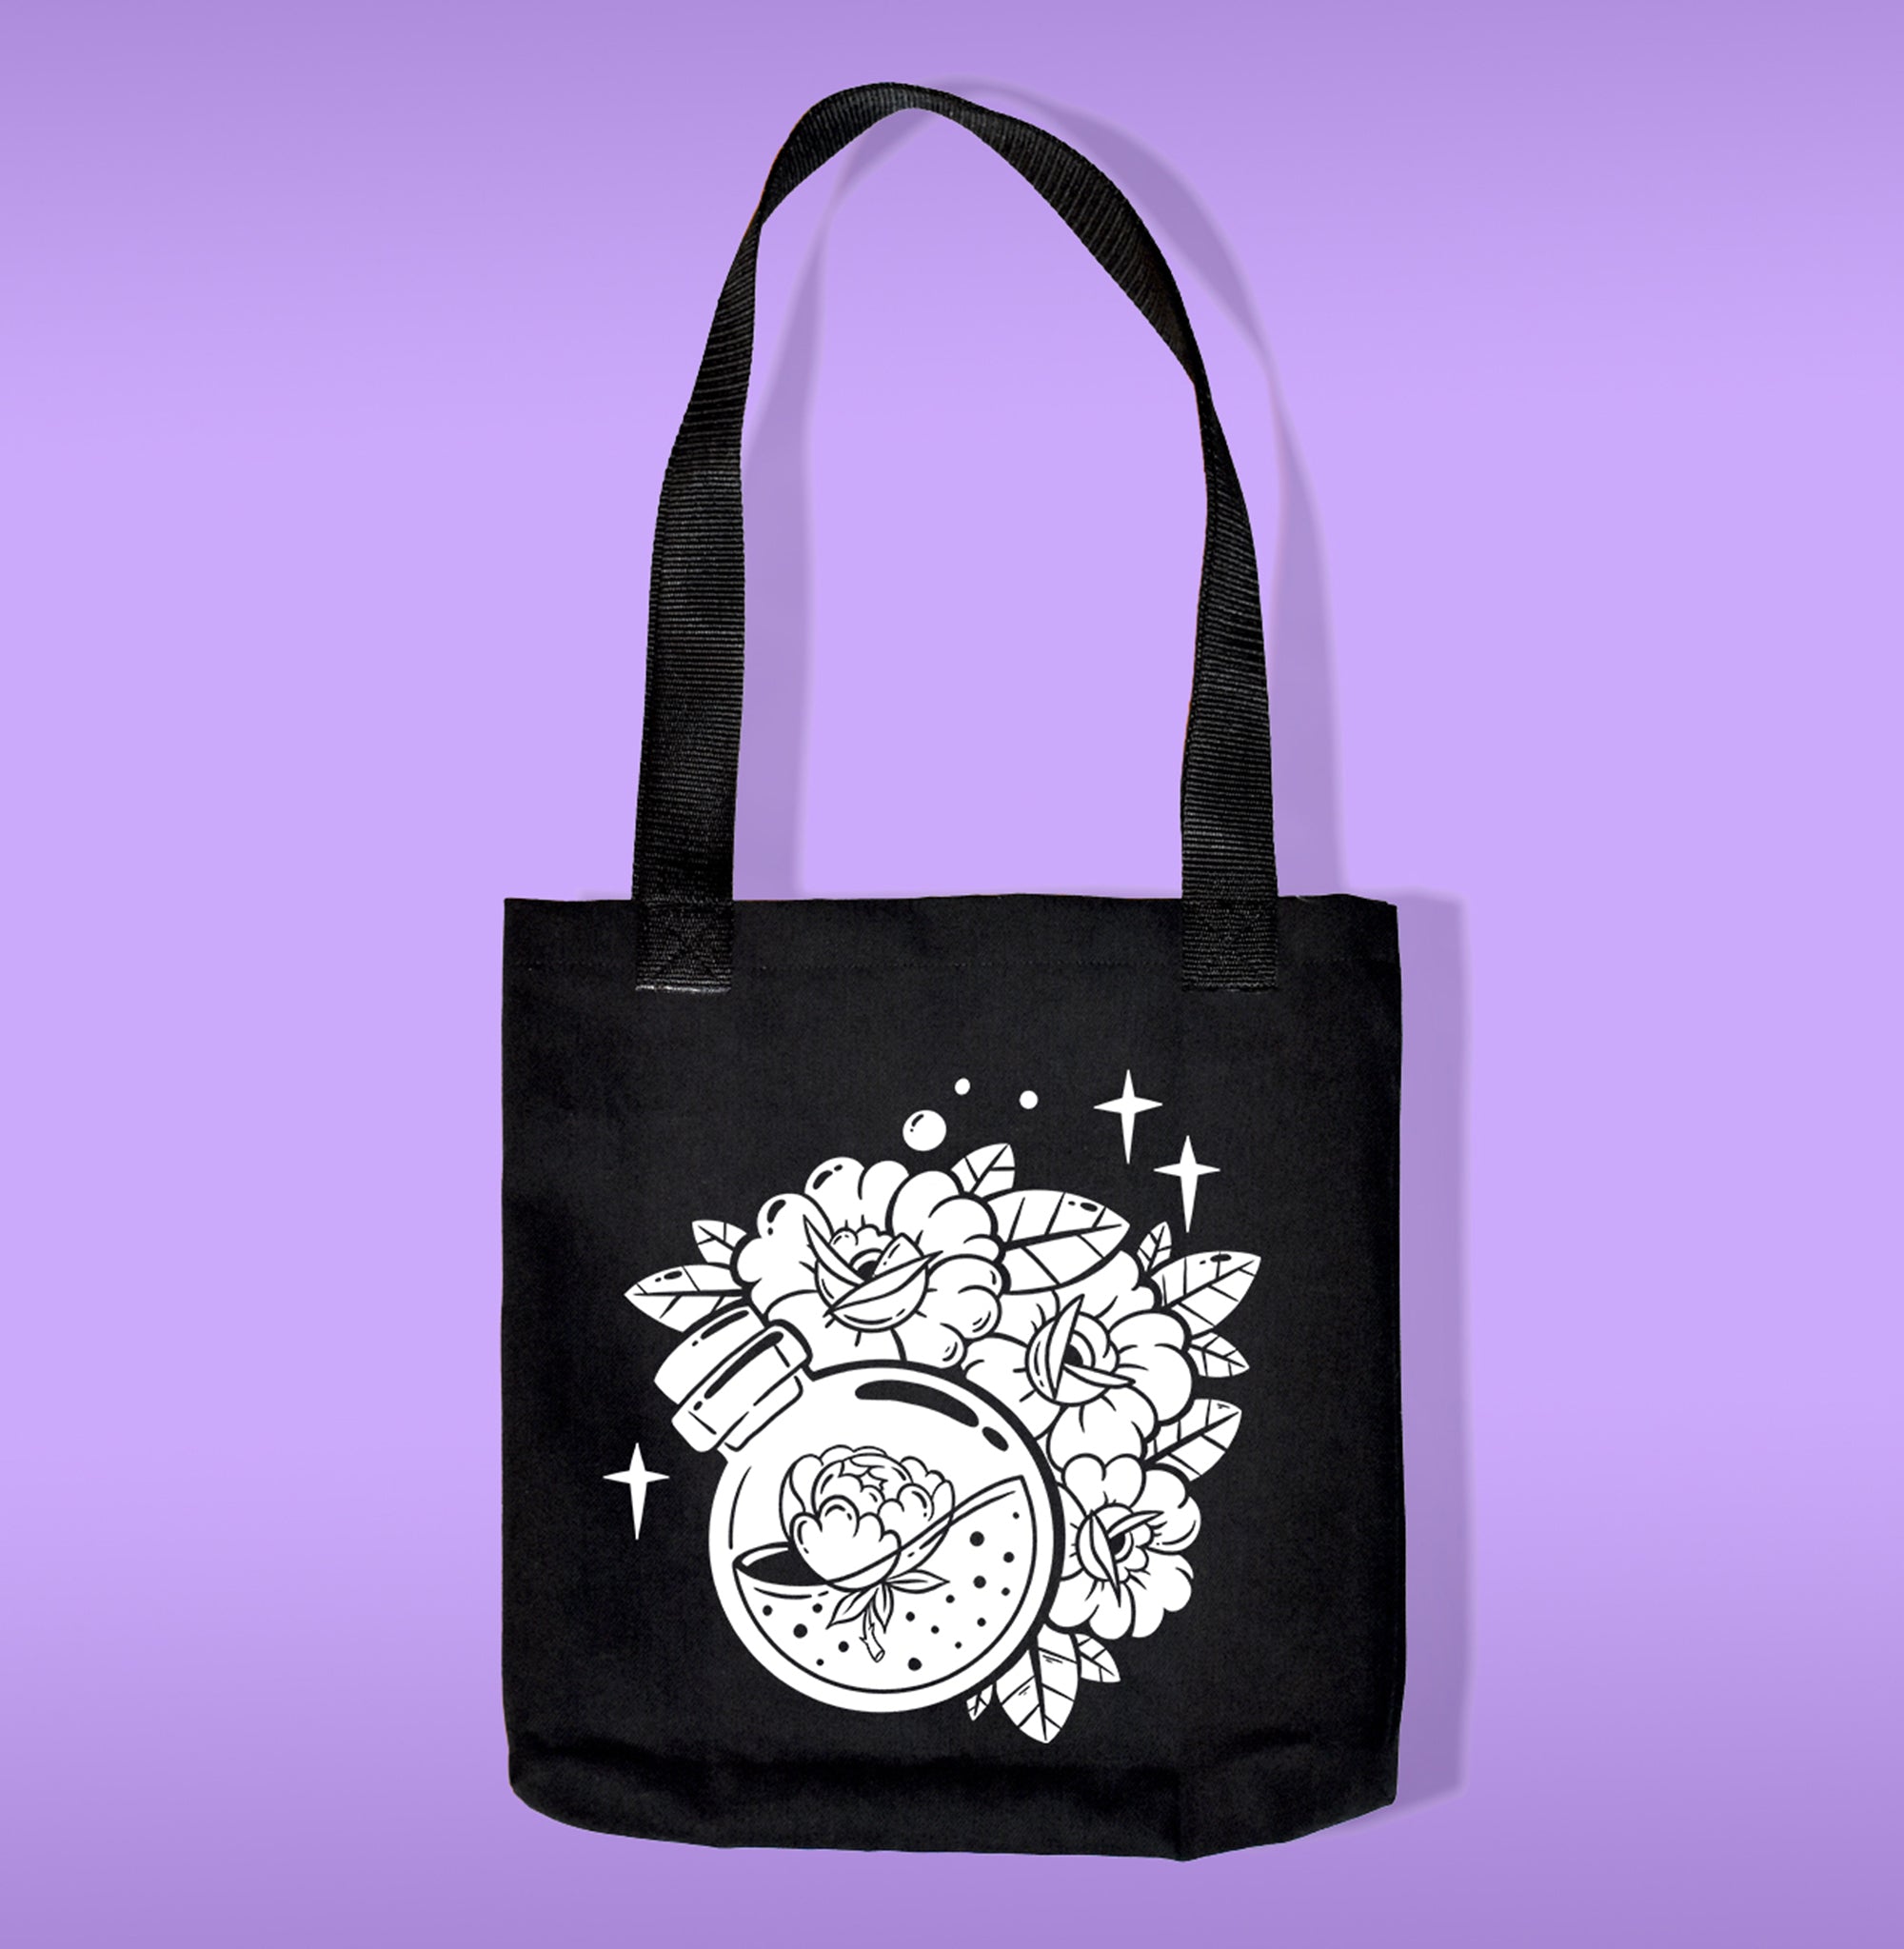 A black canvas bag with polypropelene straps. Features a caldron on a bottle filled with a lotus with flowers heat transfer print